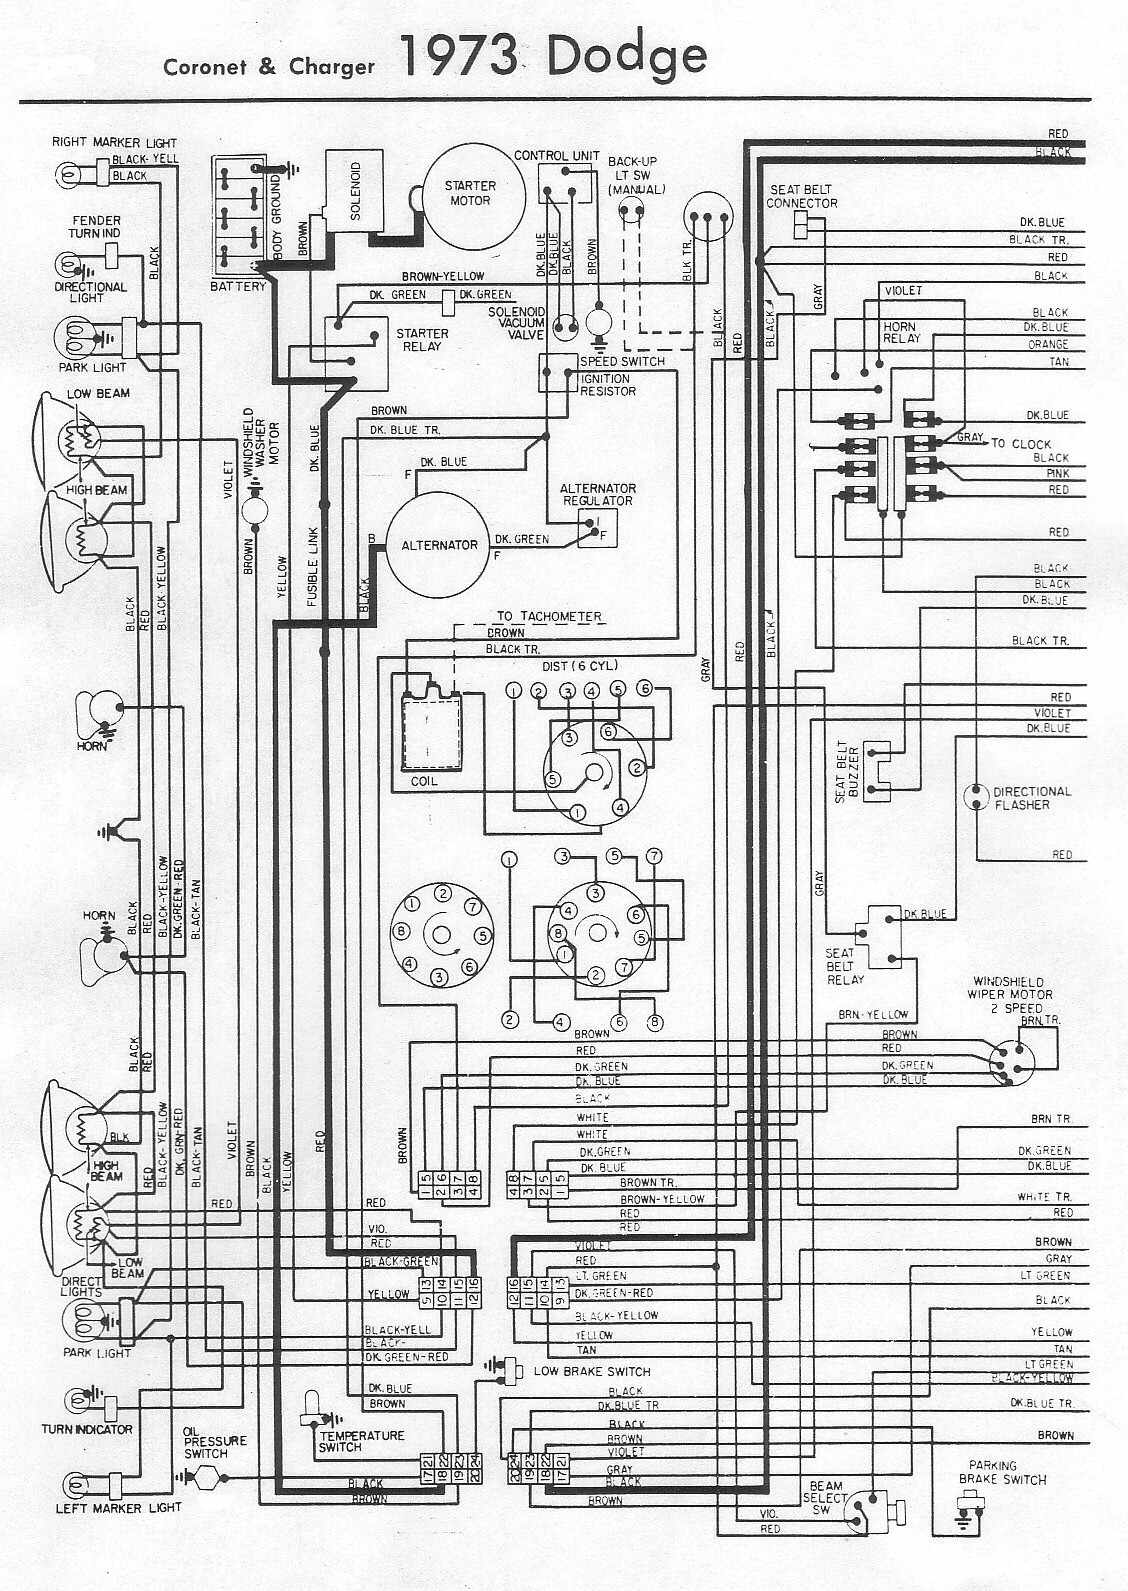 Asd Wiring Diagram 2012 Dodge Charger from www.automotive-manuals.net